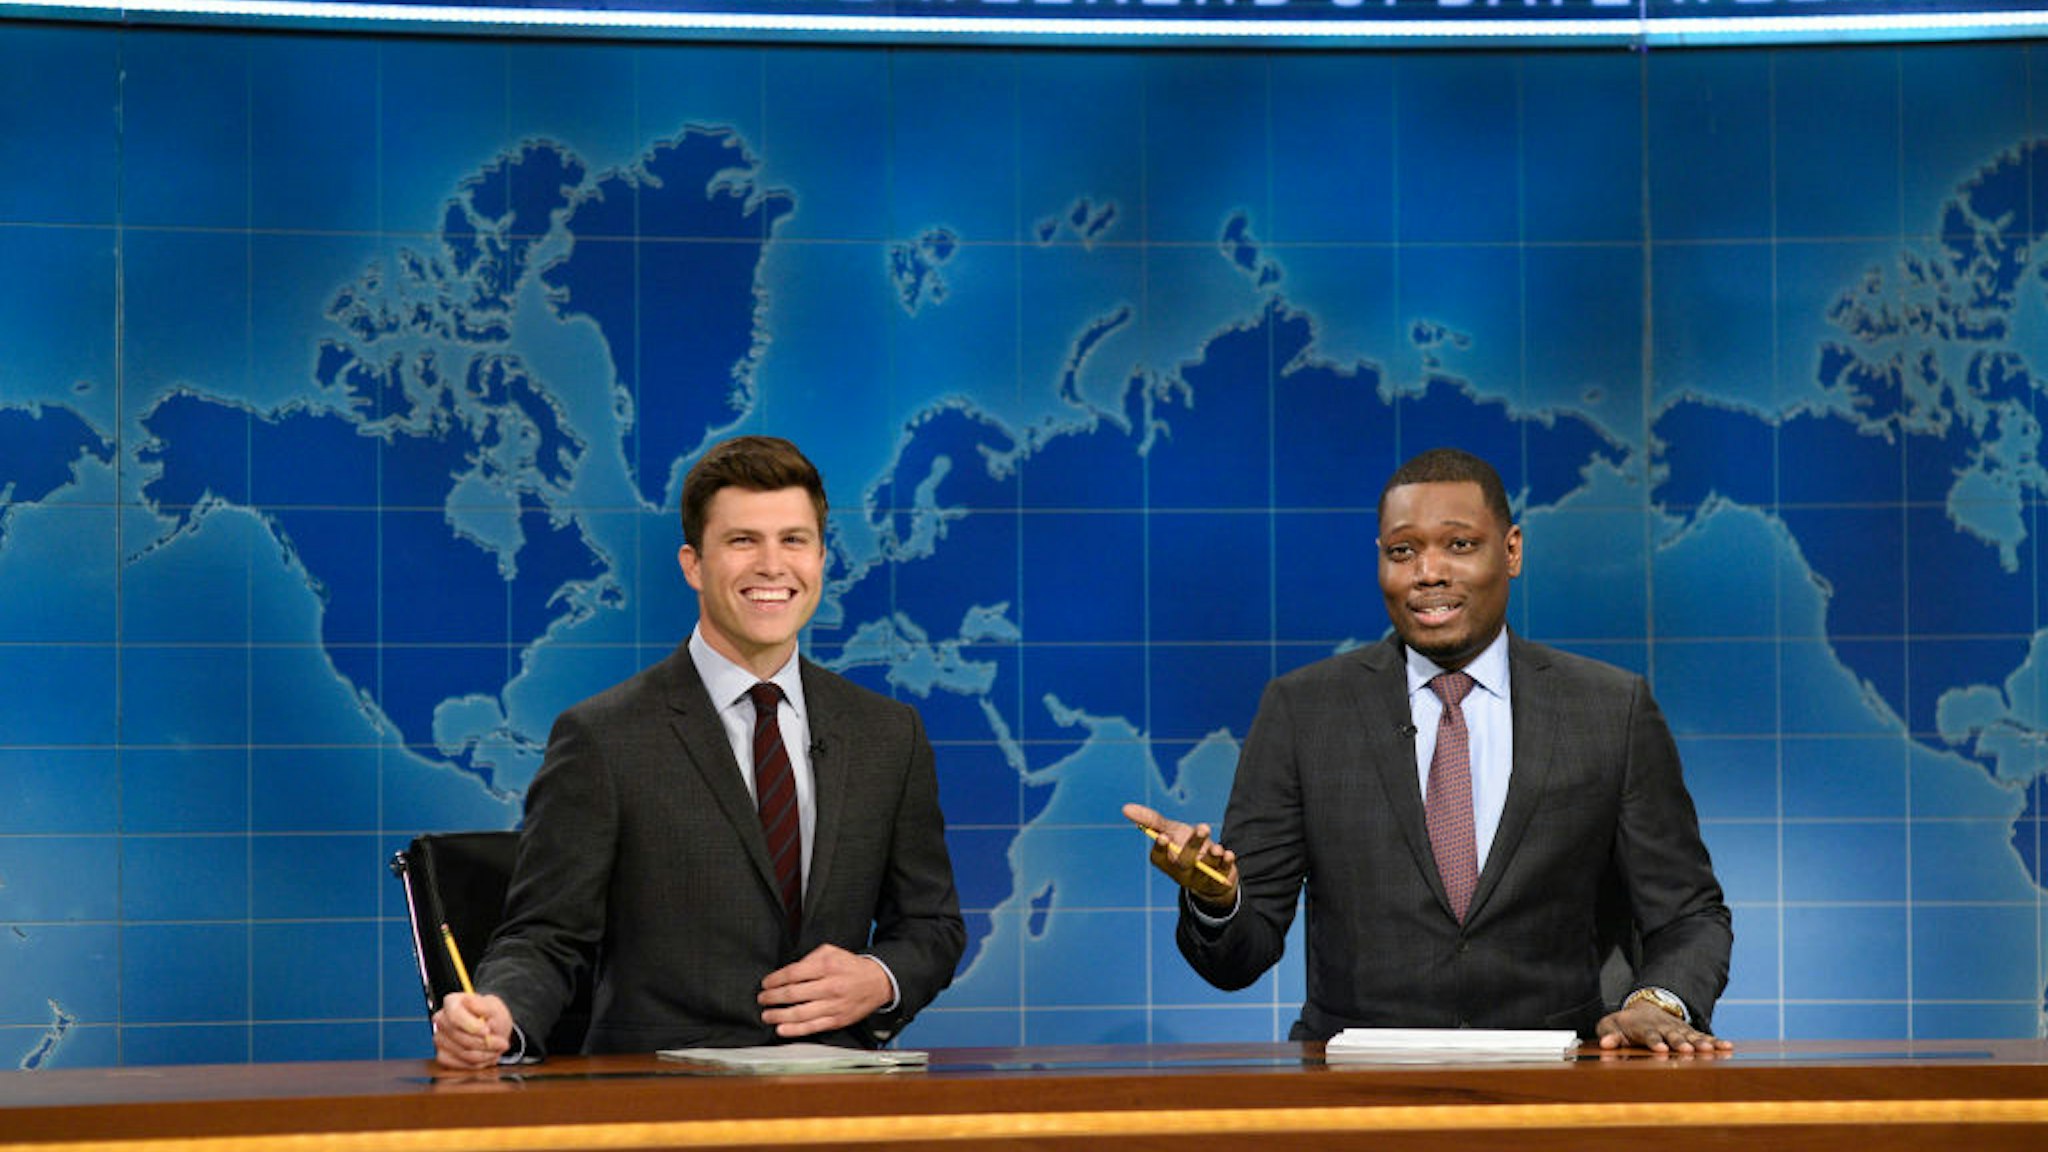 SATURDAY NIGHT LIVE: WEEKEND UPDATE -- Episode 101 -- Pictured: (l-r) Colin Jost, Michael Che from Studio 8H on August 10, 2017 -- (Photo by: Rosalind O'Connor/NBCU Photo Bank/NBCUniversal via Getty Images via Getty Images)